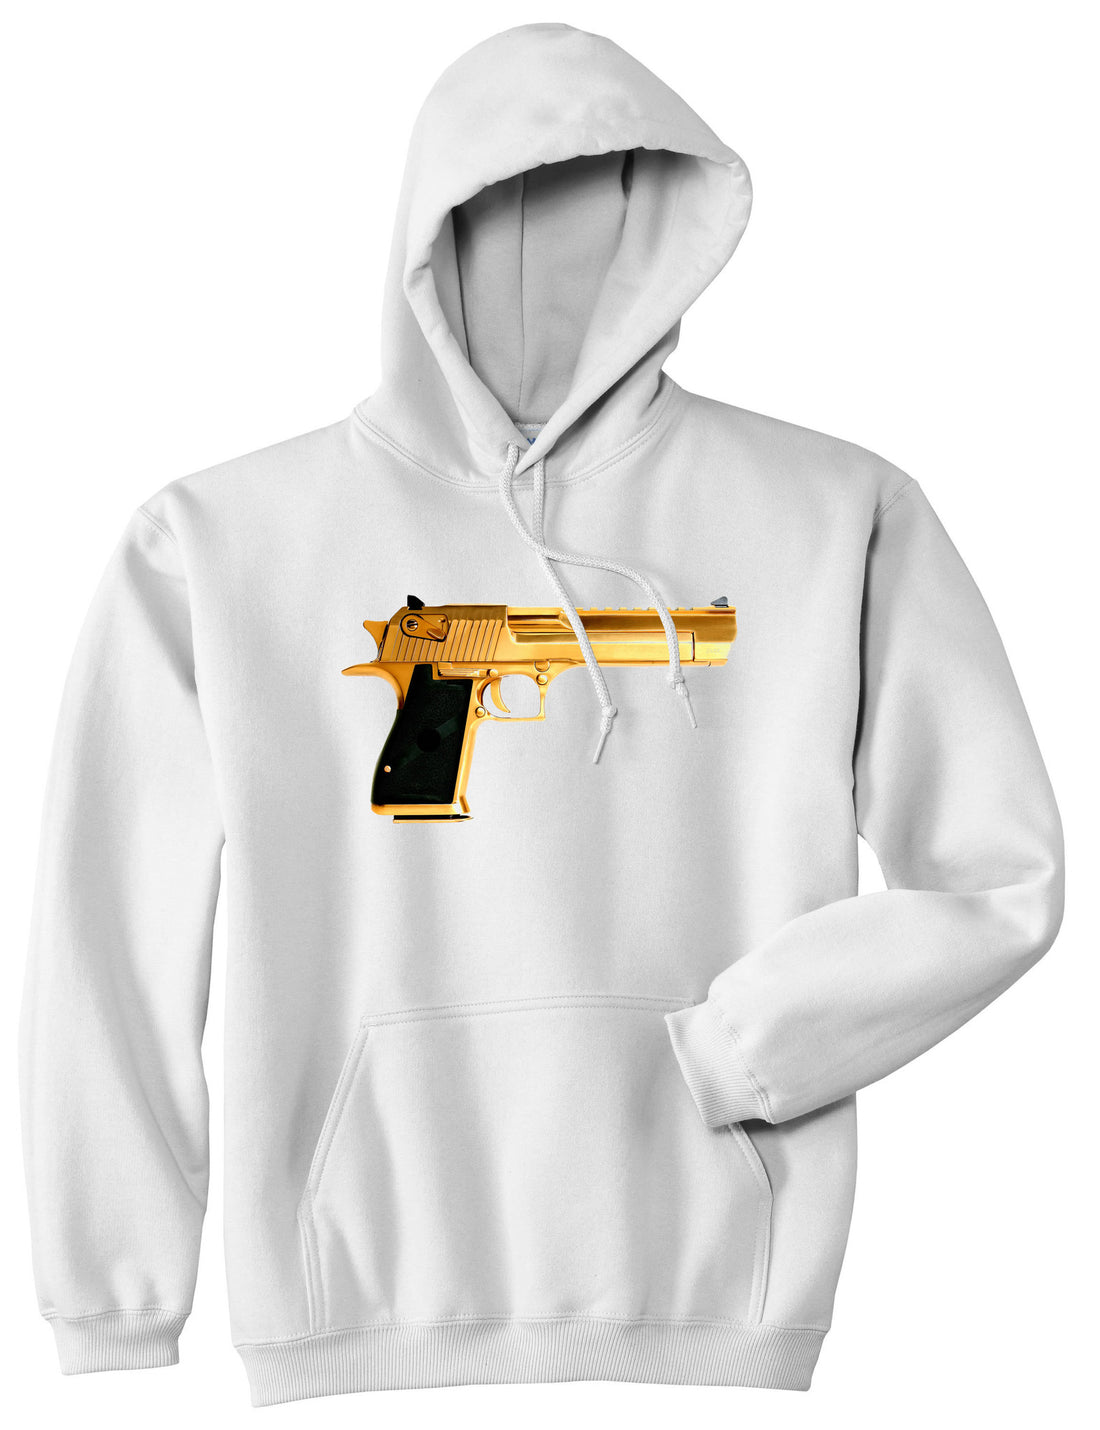 Gold Gun 9mm Revolver Chrome 45 Pullover Hoodie Hoody in White by Kings Of NY